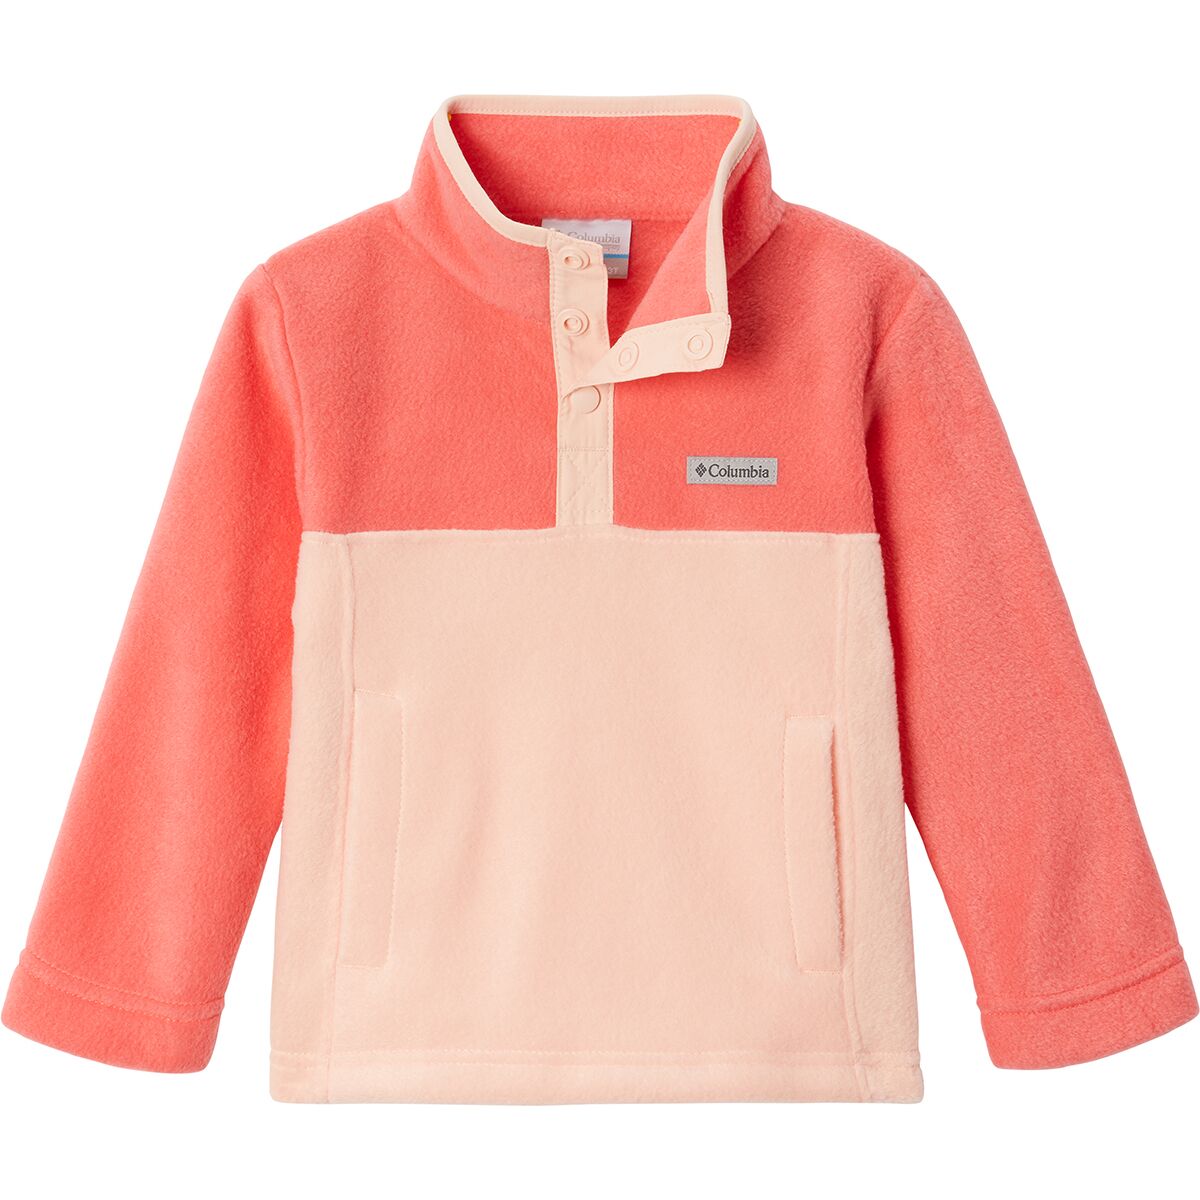 Columbia Steens Mountain 1/4-Snap Fleece Pullover - Toddlers'